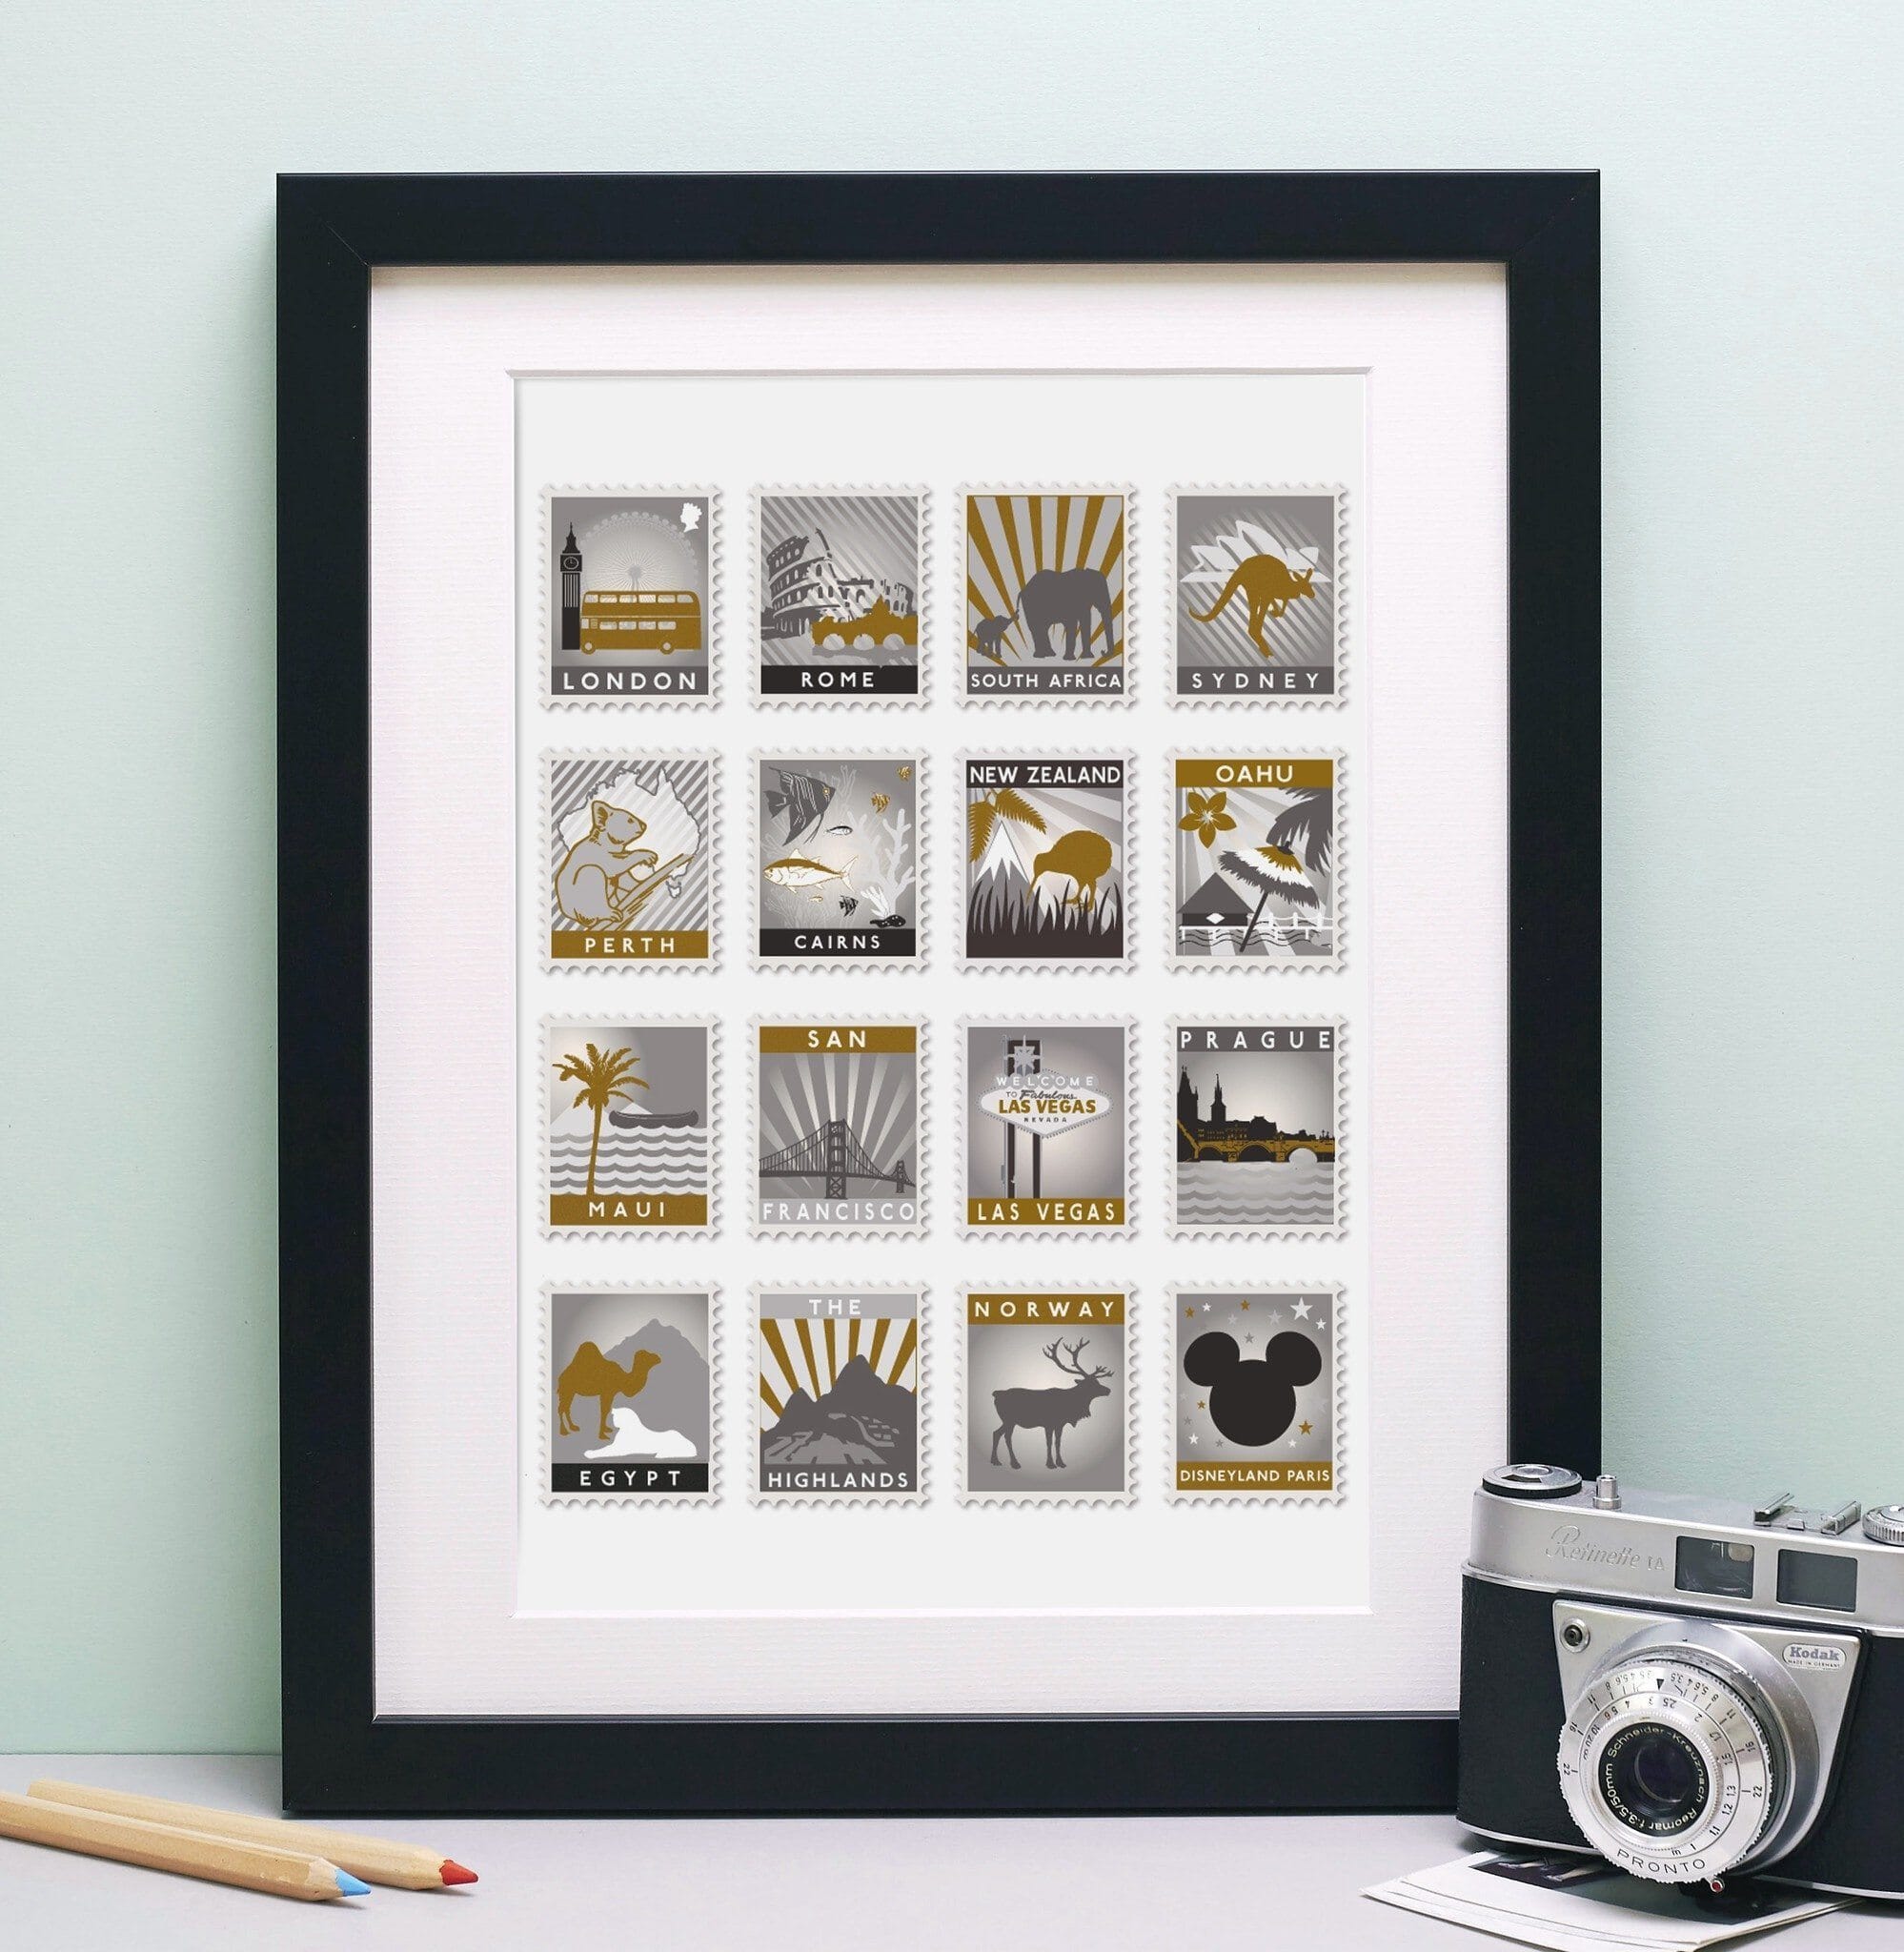 Black framed print with 16 monochrome and gold toned stamp designs on a white background.